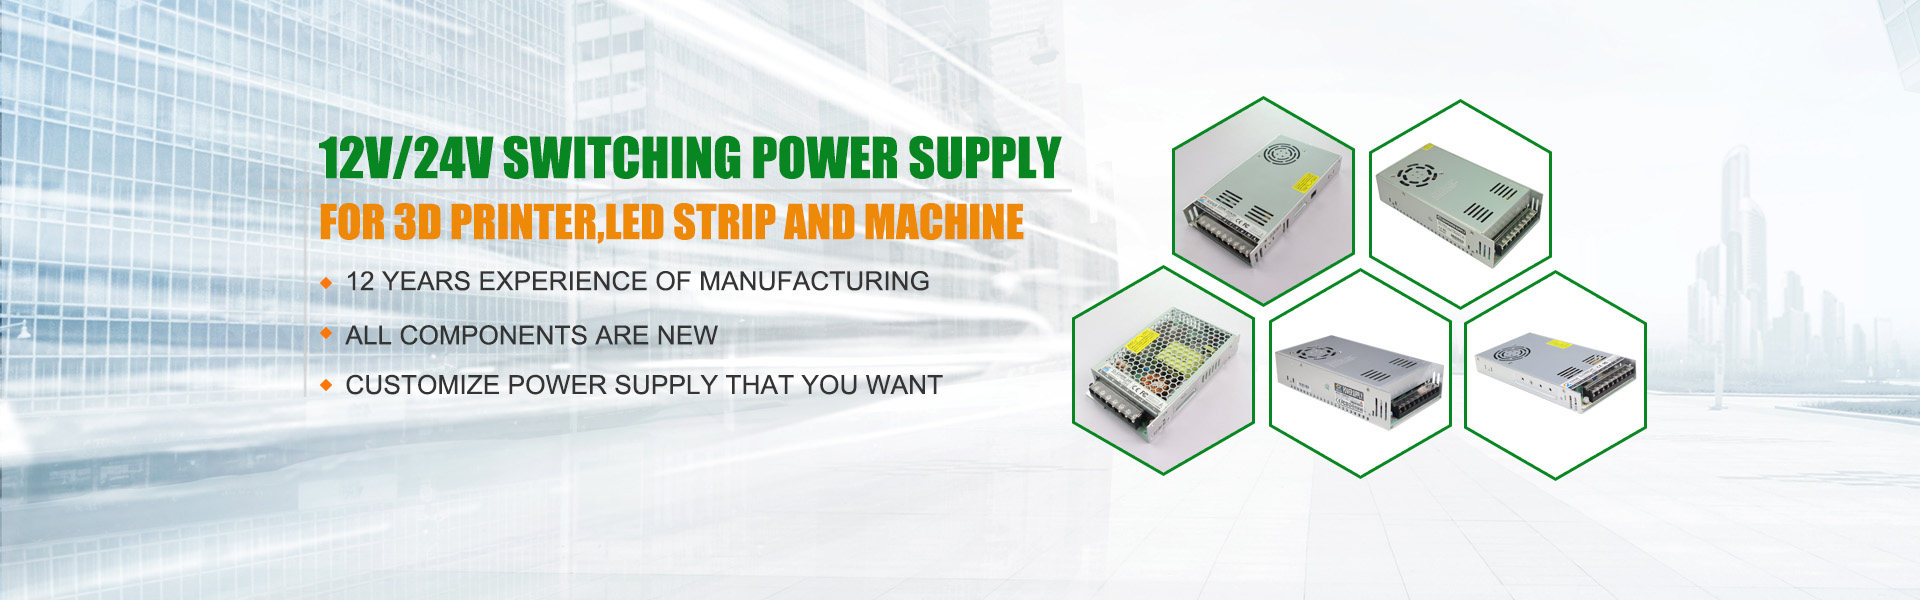 switching power supply,led driver,smps,Dongguan Chengliang Intelligent Technology Co,.Ltd